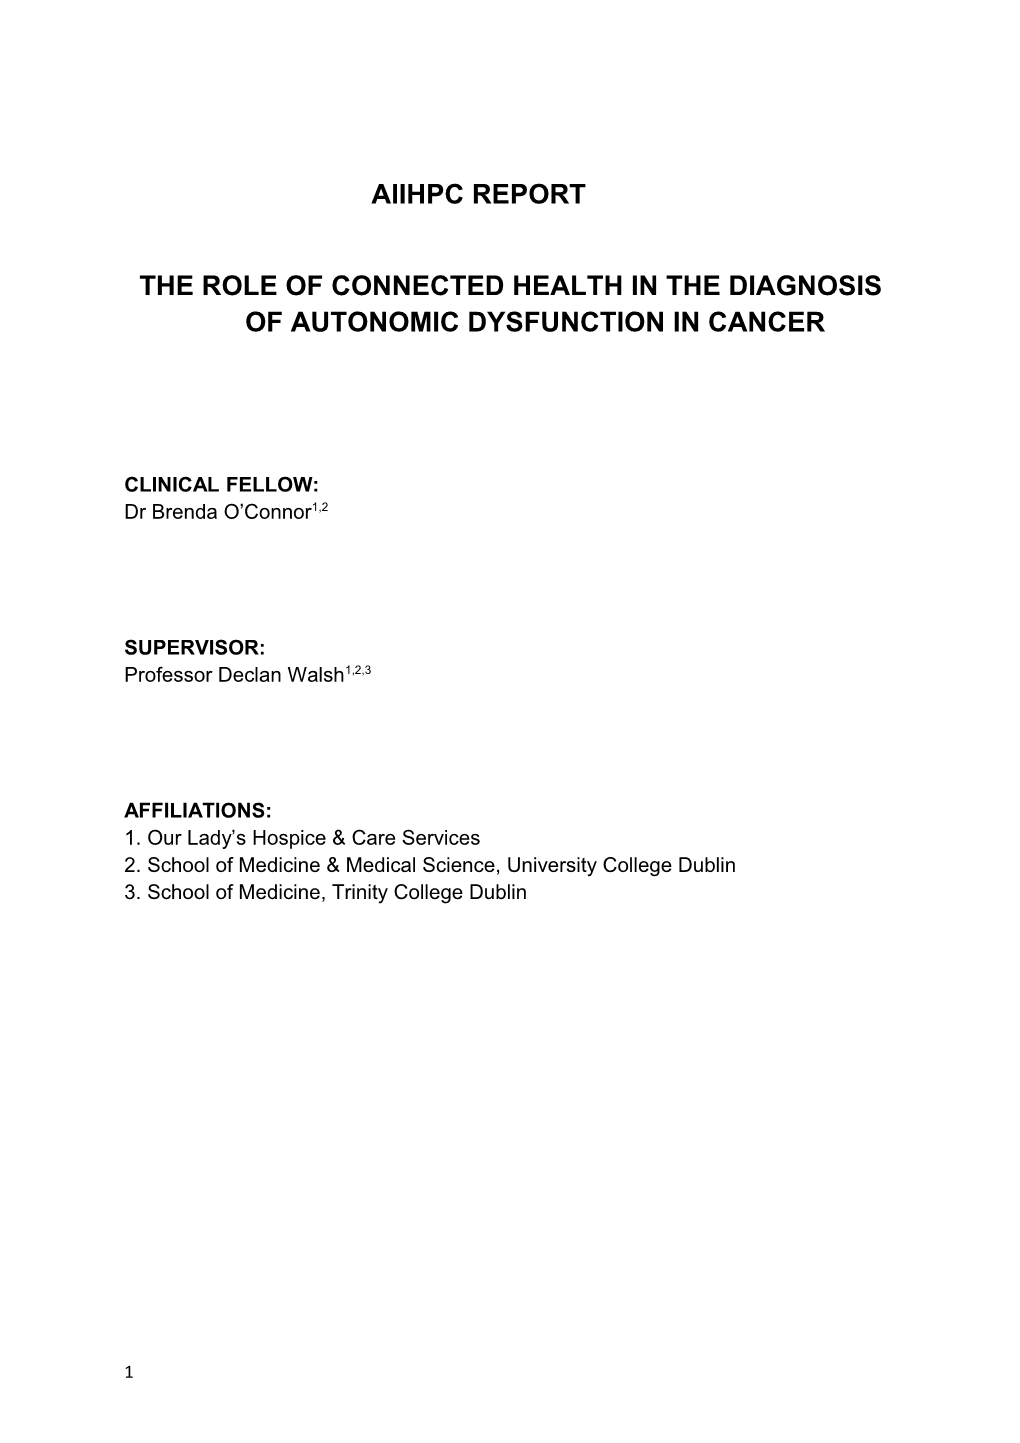 The Role of Connected Health in the Diagnosis of Autonomic Dysfunction in Cancer